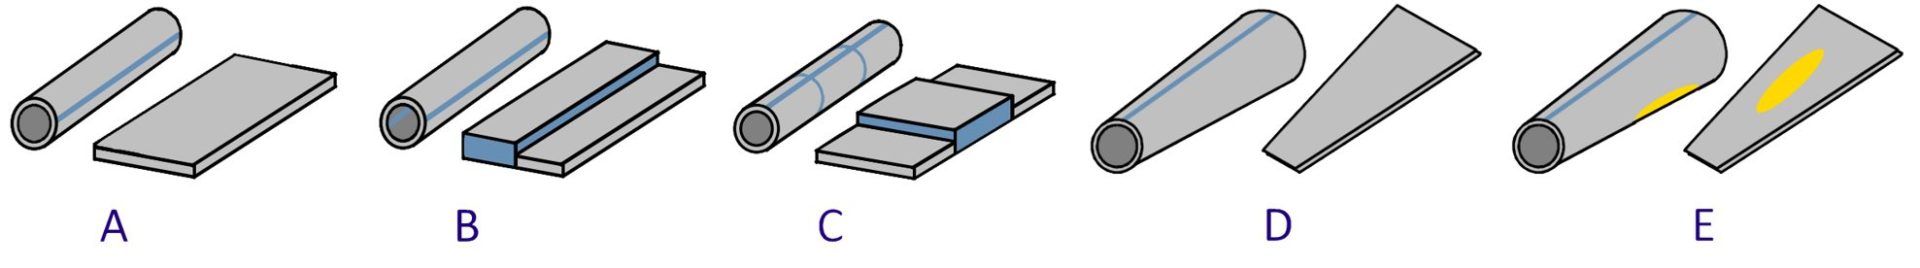 Figure 5: Tailored tube production allows for differing thickness and strength within the same tube. A) 1-piece cylindrical tube with monolithic properties; B and C) 2-piece tailored tube with property variation down the length of the tube; D) 1-piece conical tube; E) 2-piece conical tube with a patchwork blank.